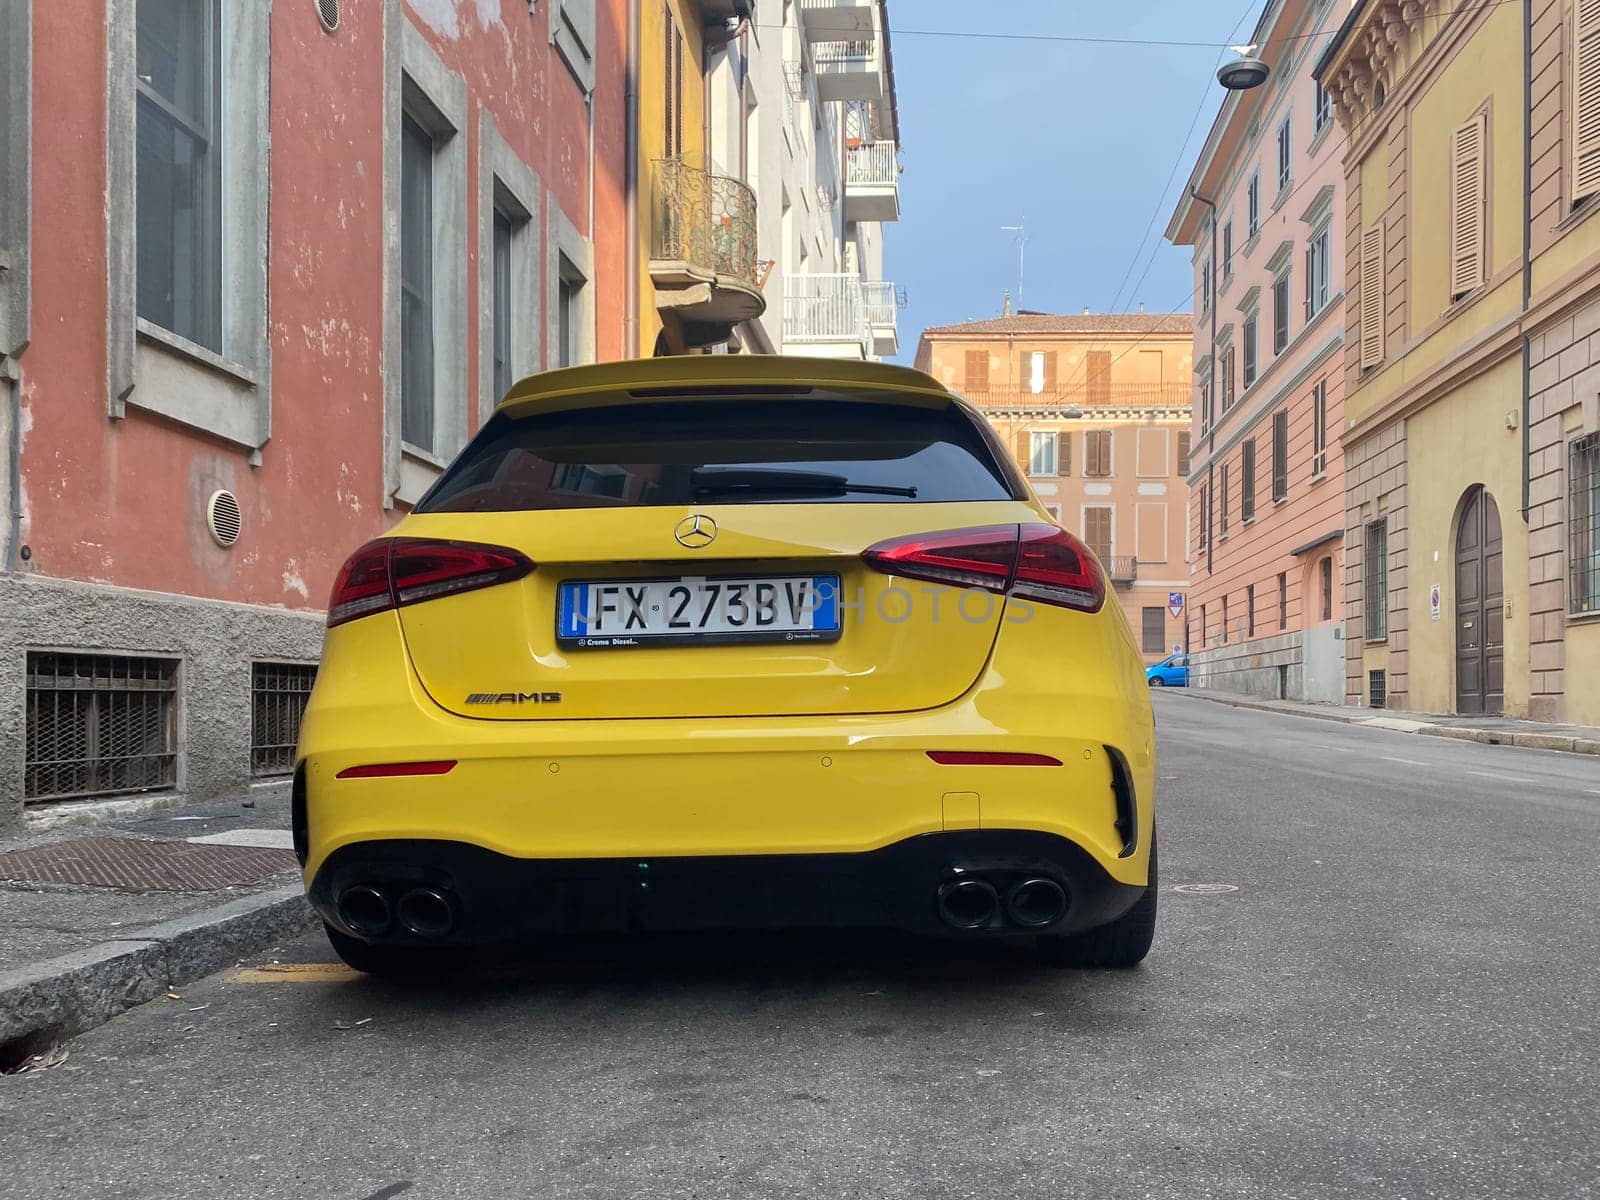 Cremona, Italy - April 2023 Mercedes Benz A class AMG yellow german compact design sport city car parked in the street